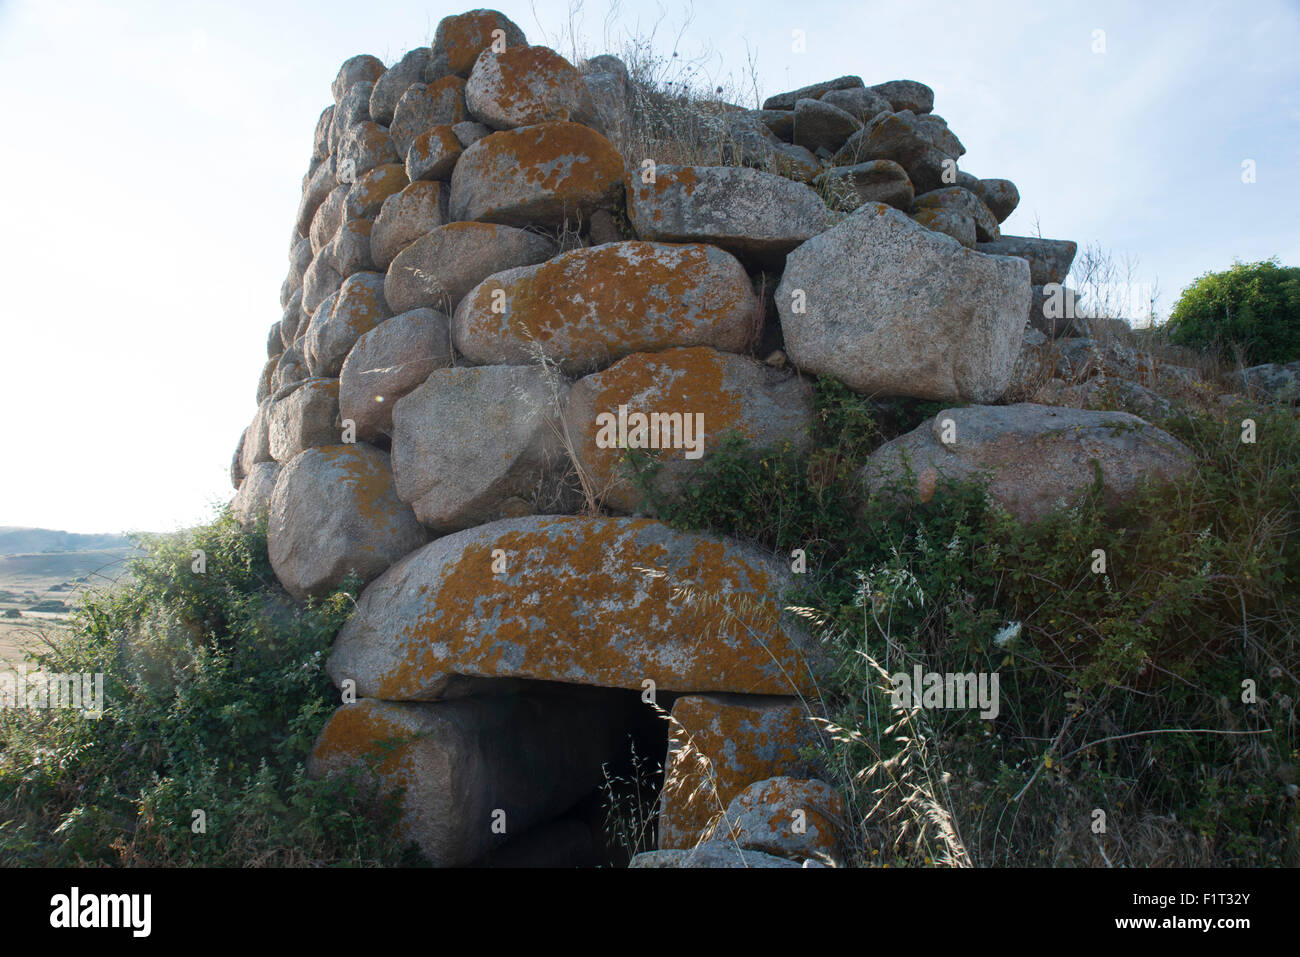 Nuraghe Izzana, one of the largest Nuraghic ruins in the province of Gallura, dating from 1600 BC, Sardinia, Italy, Europe Stock Photo